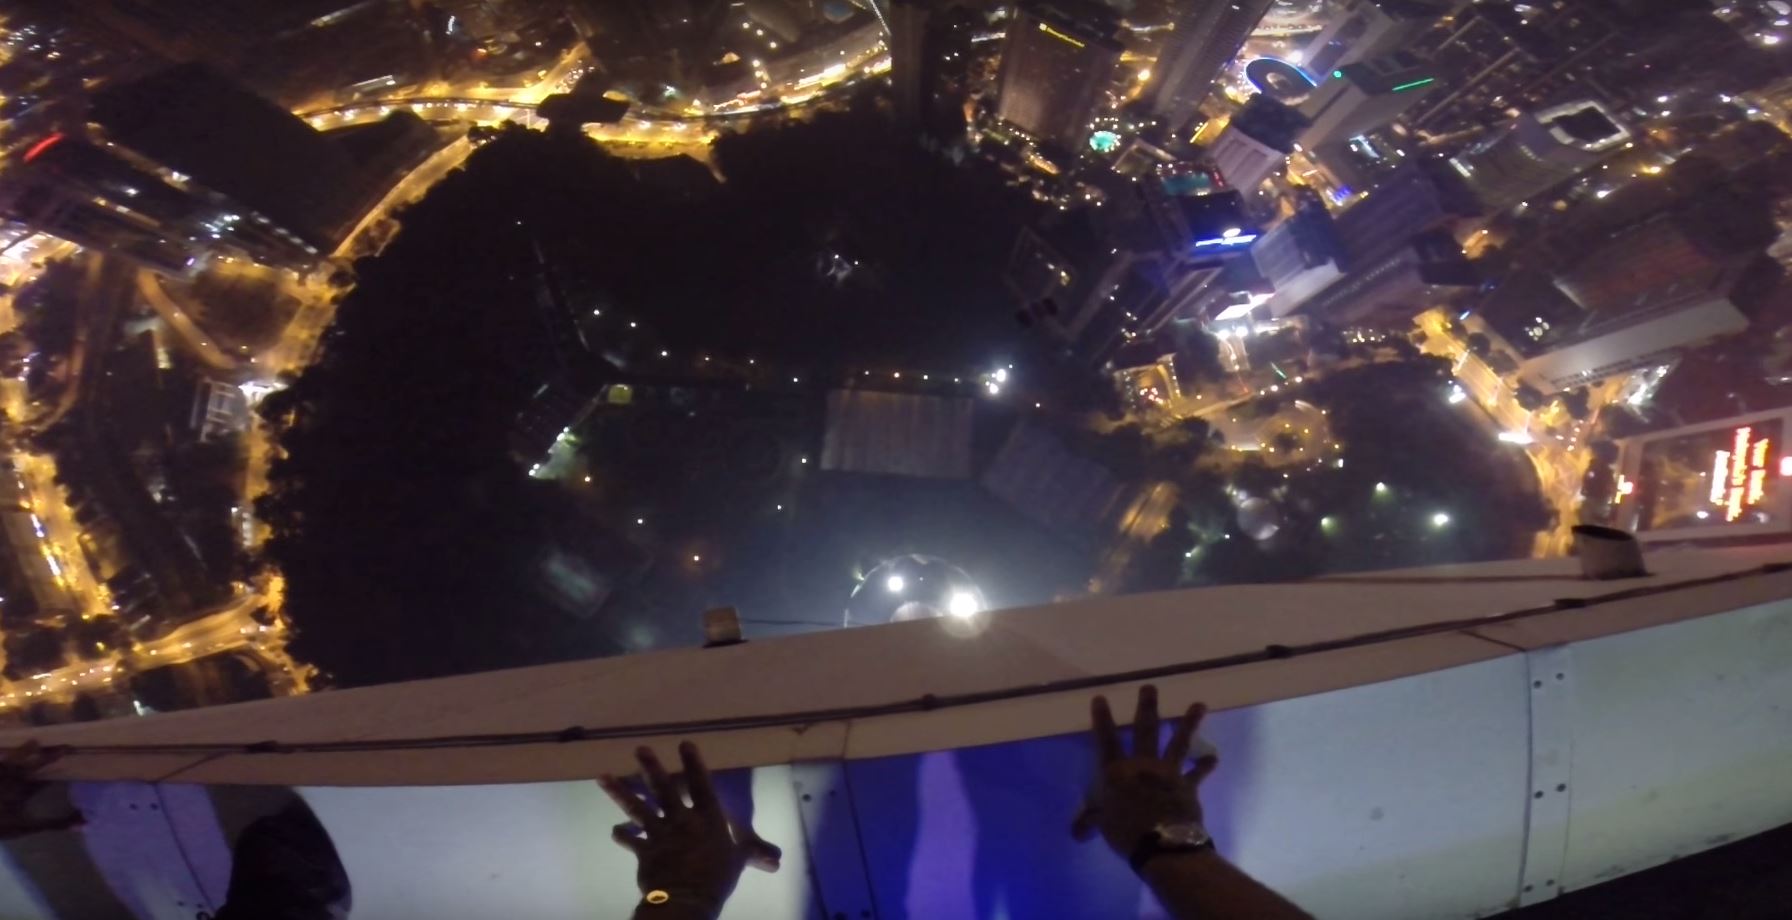 Base jumper makes f*cken epic entrance to rooftop pool party